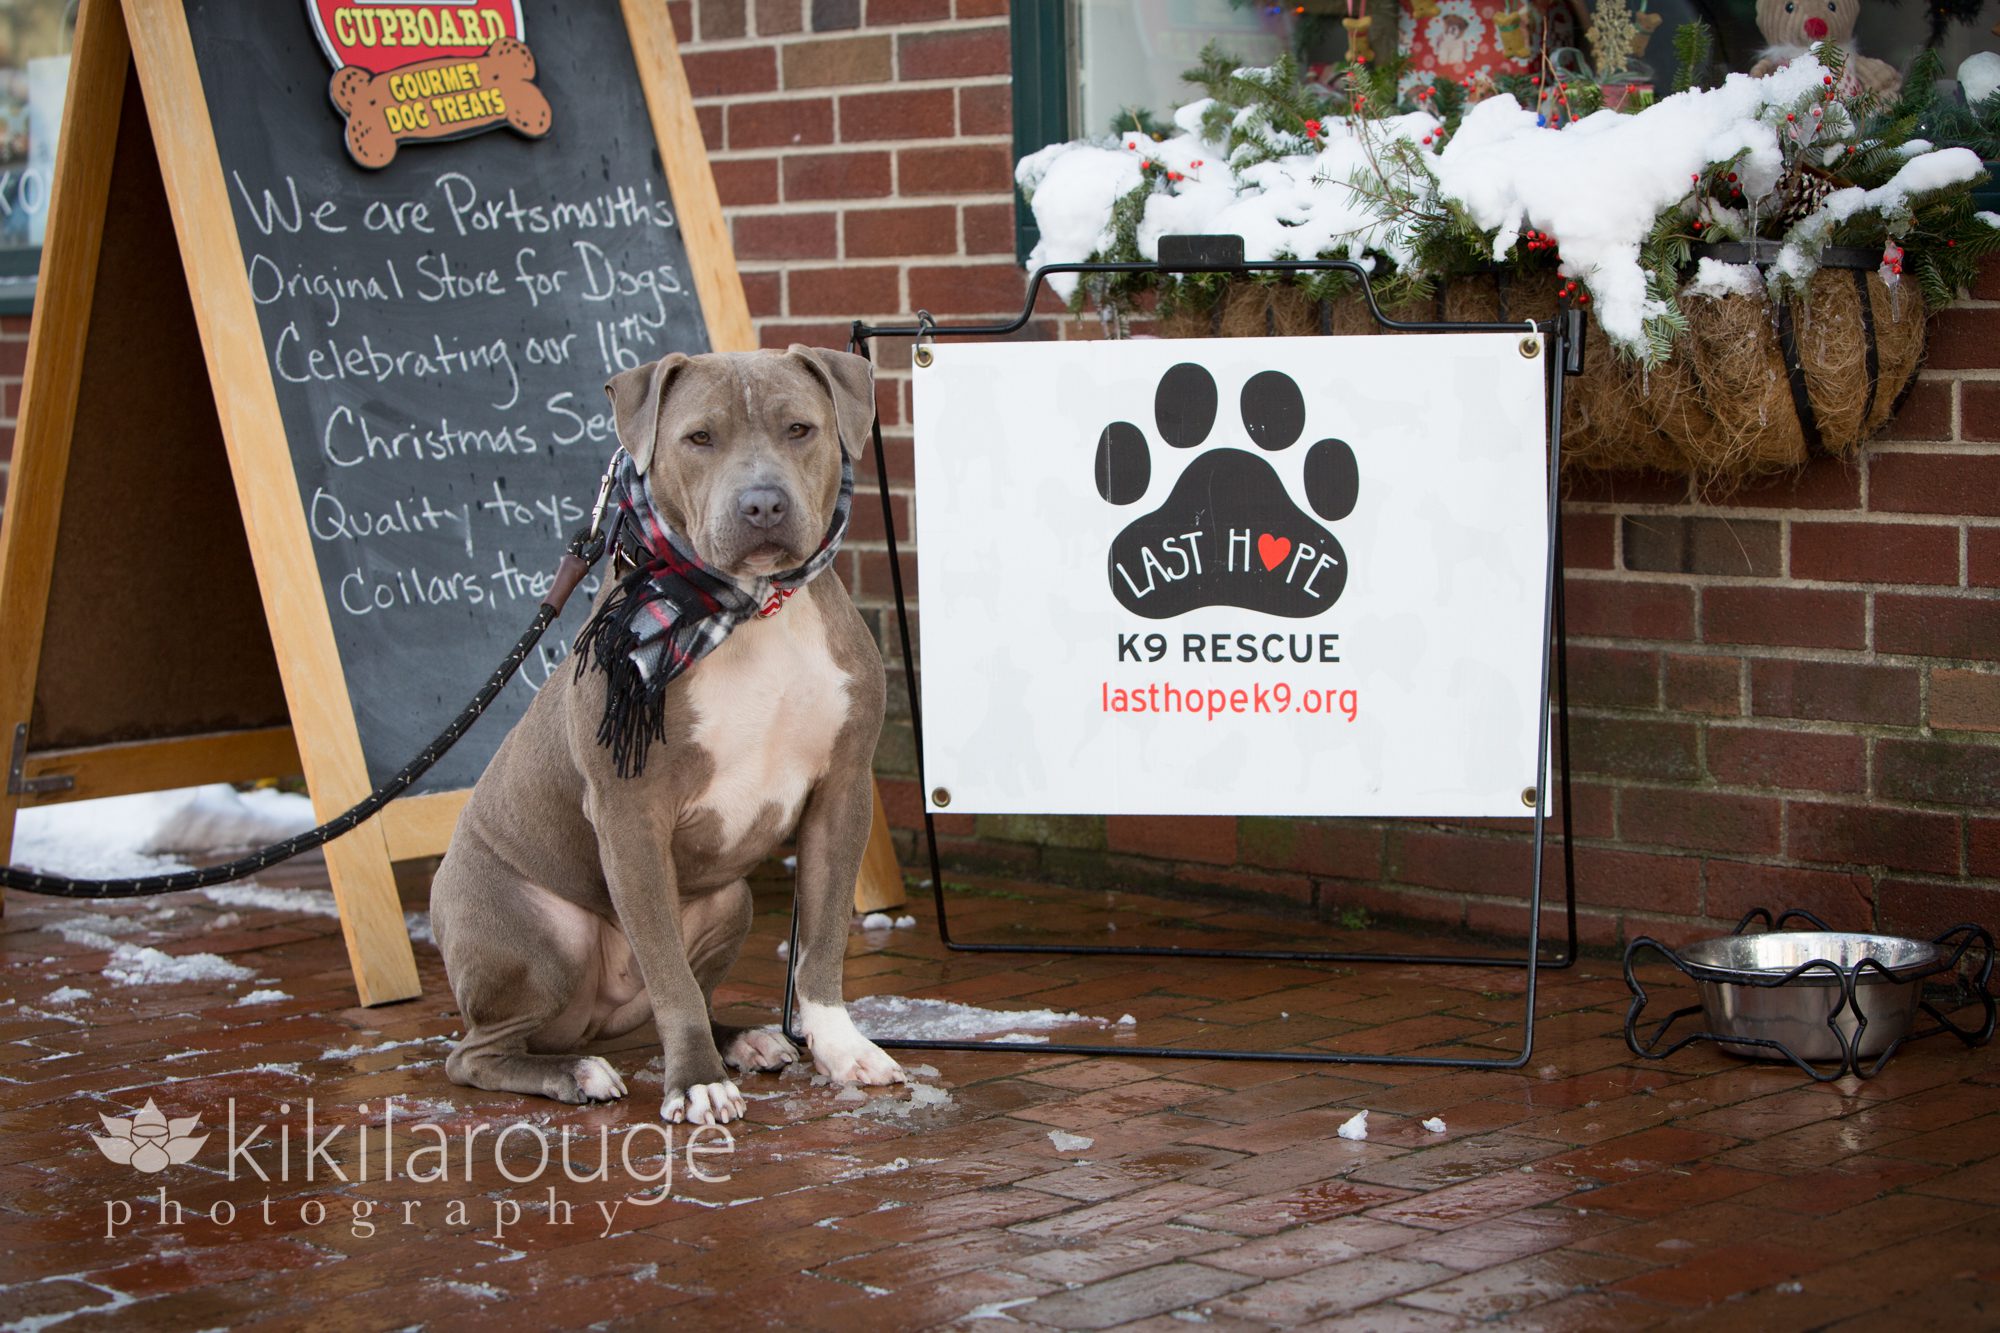 Dog Rescue Event in Portsmouth NH with Pit Bull